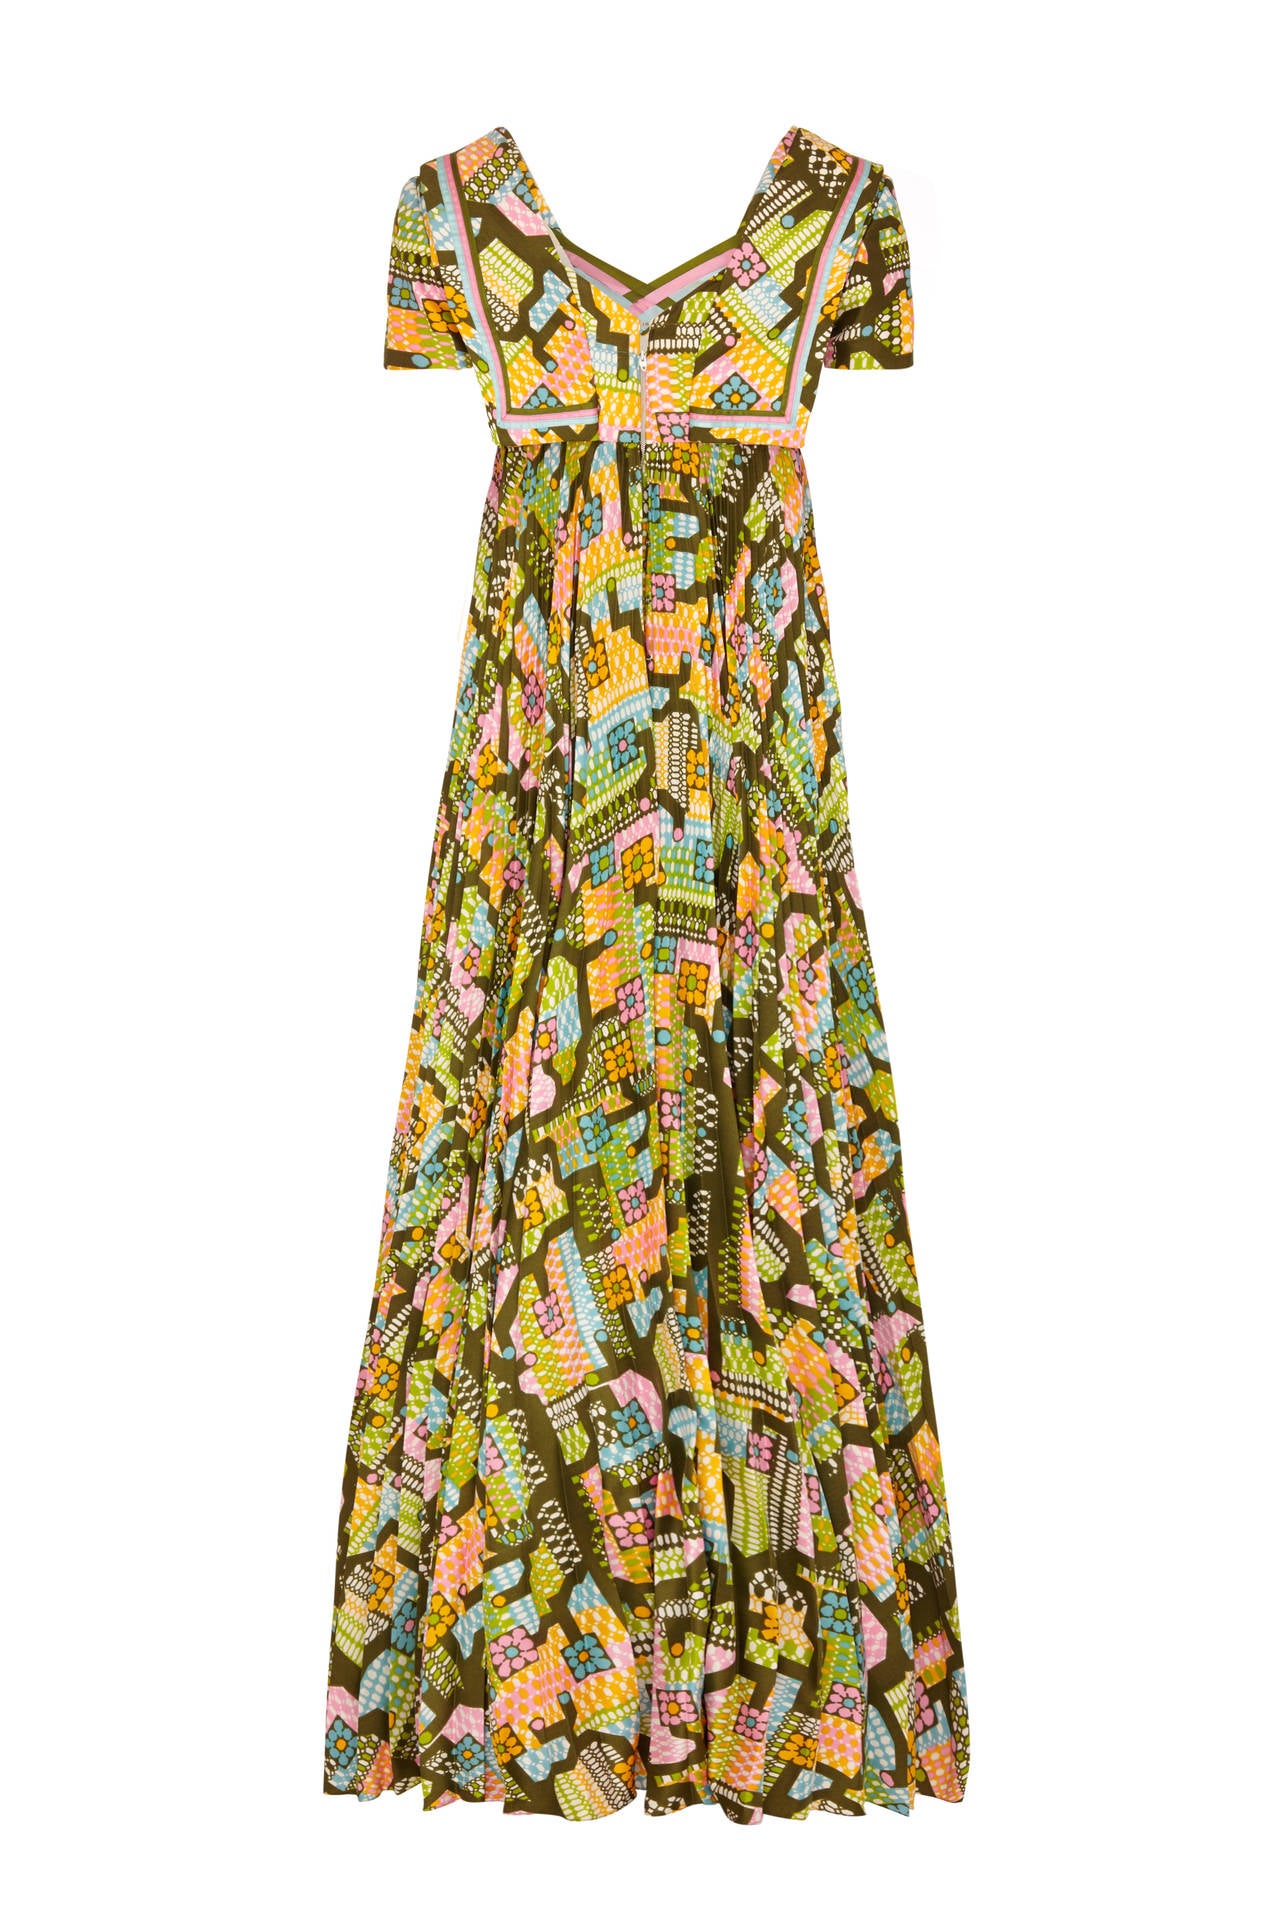 This 1970s abstract print silk empire line dress by iconic British designer Hardy Amies is in wonderful vintage condition and features a full length tightly pleated skirt, sailor collar and V-neckline with woven ribbon detail. Best renowned for his